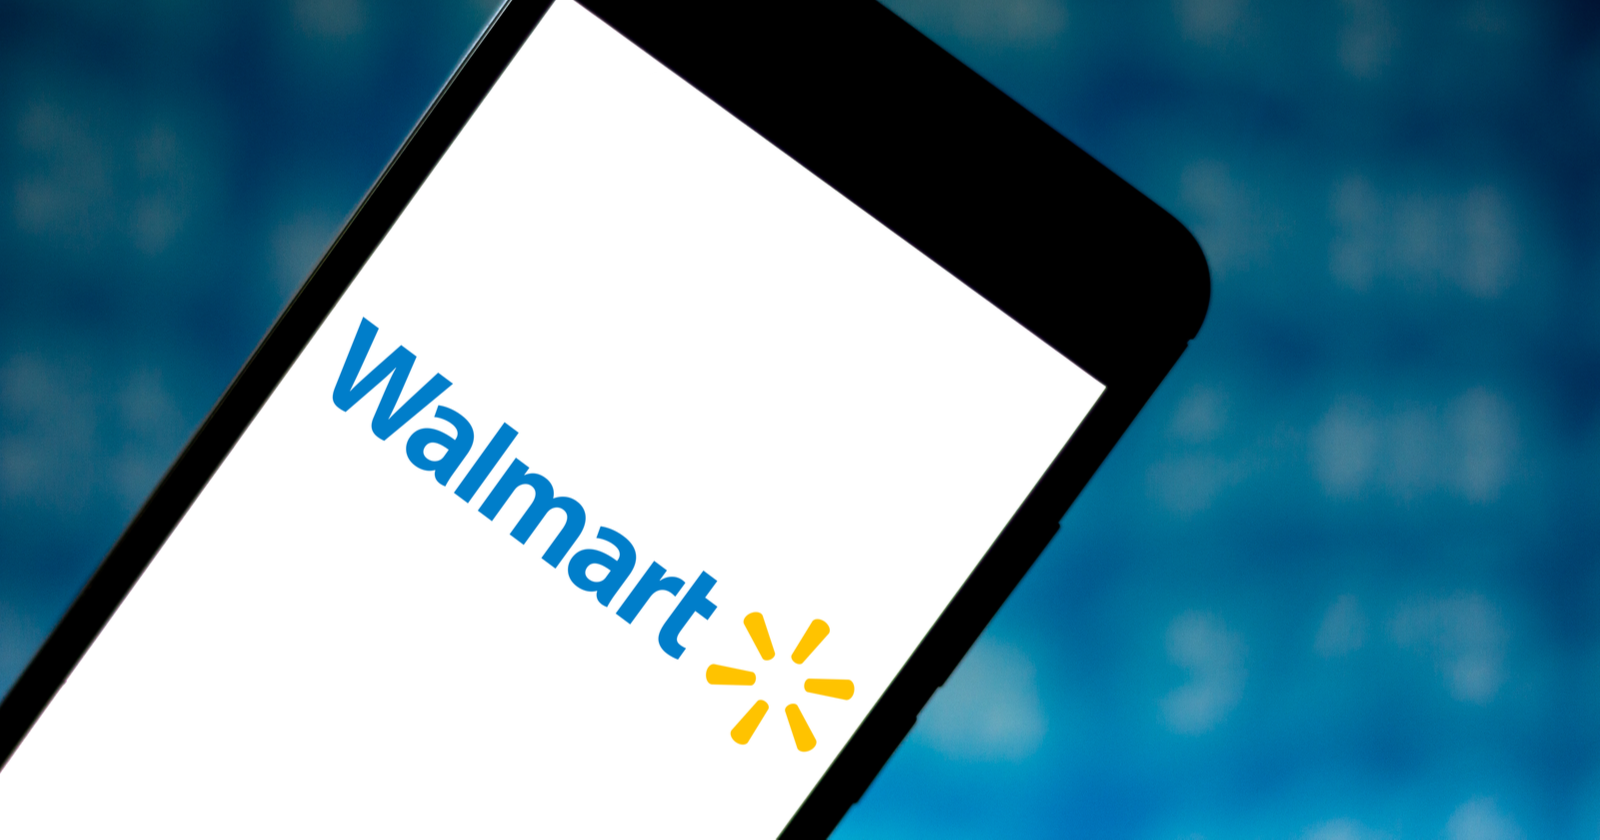 Sponsored Products with Walmart Media Group - What Sellers & Marketers Need to Know